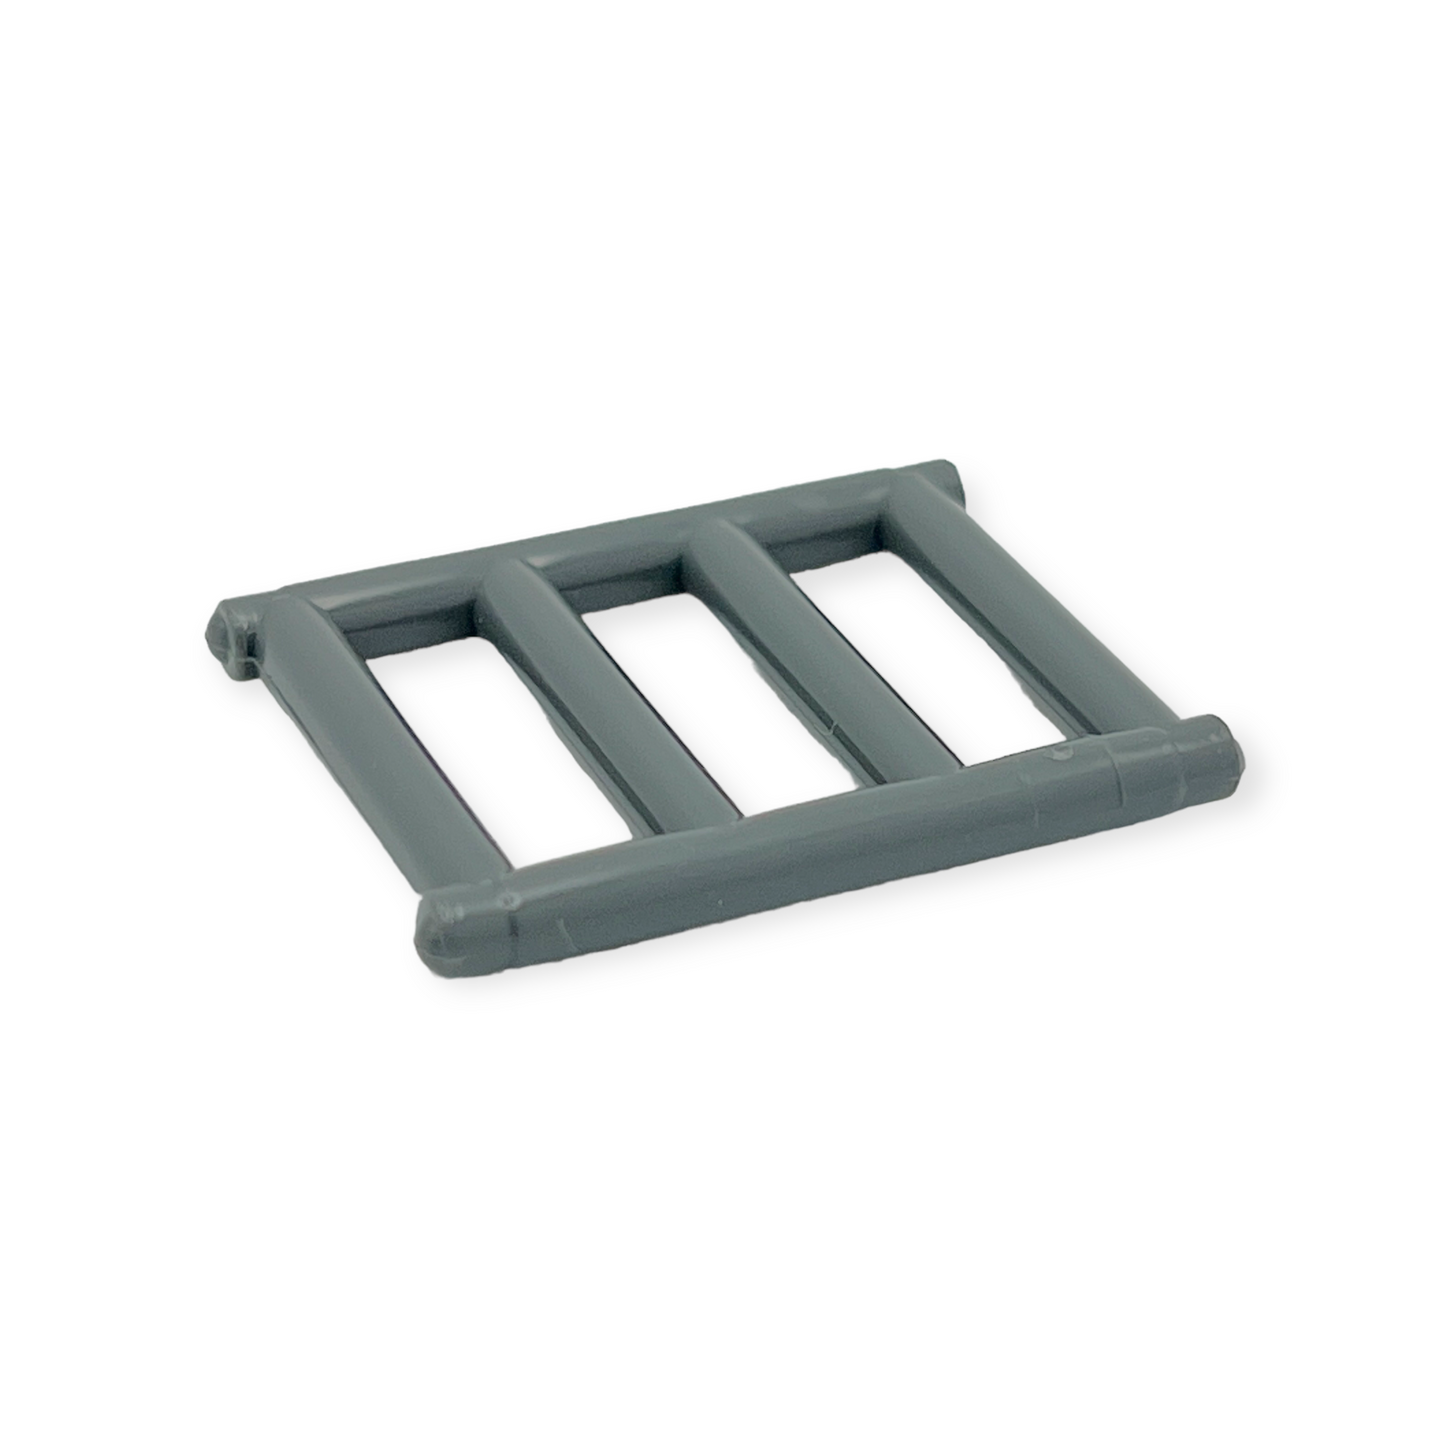 LEGO Bar 1 x4x3 Grille with End Protrusions in Dark Bluish Gray